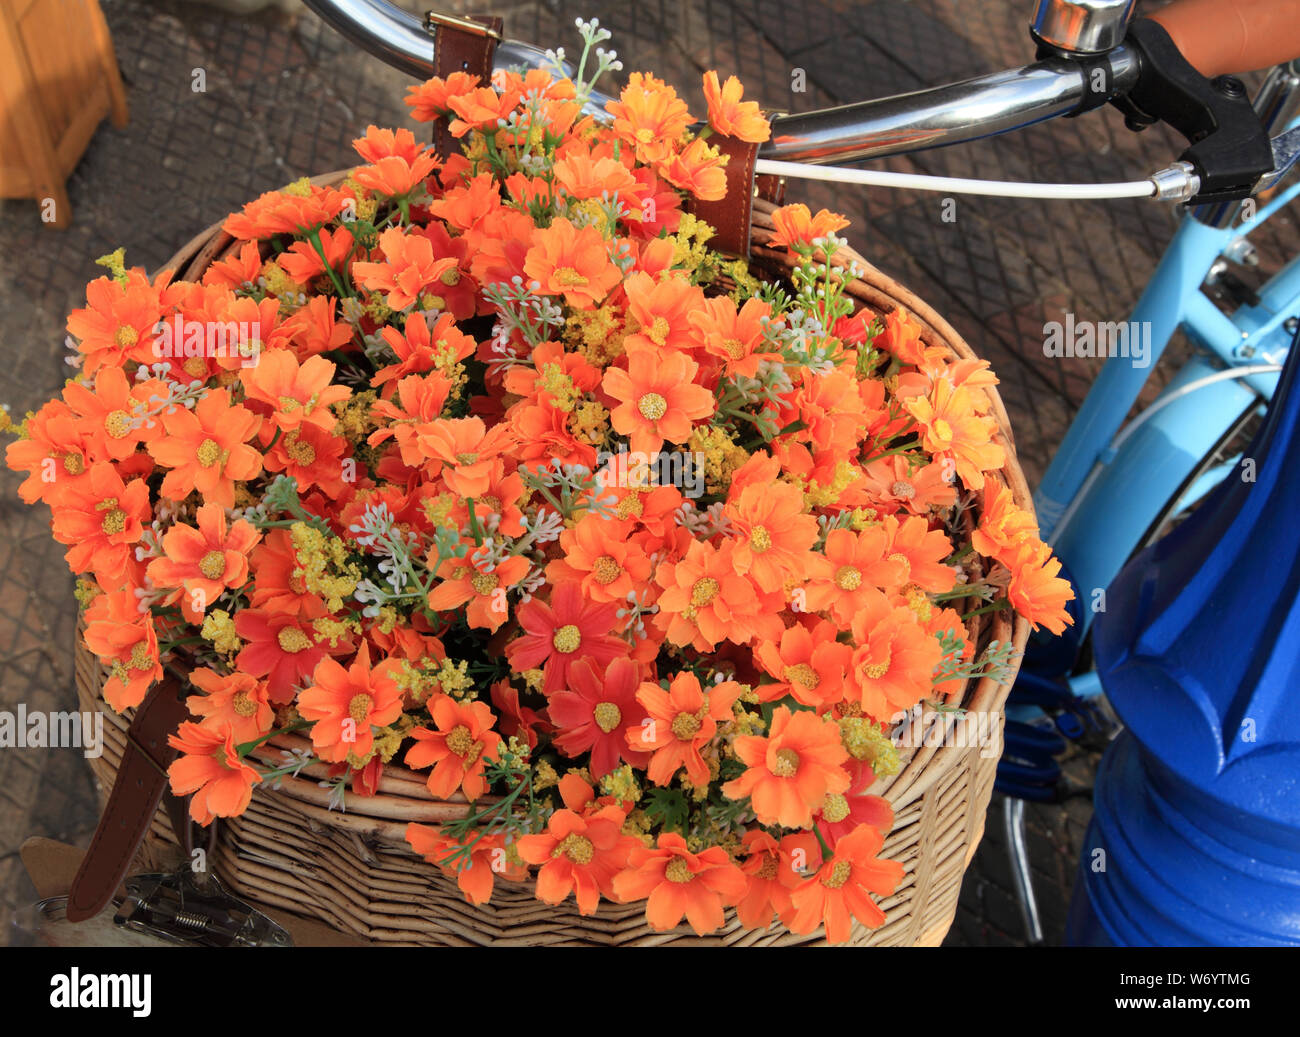 Plant Container, on bicycle, unusual, front basket, cycle, orange and yellow flowers, plants, containers Stock Photo